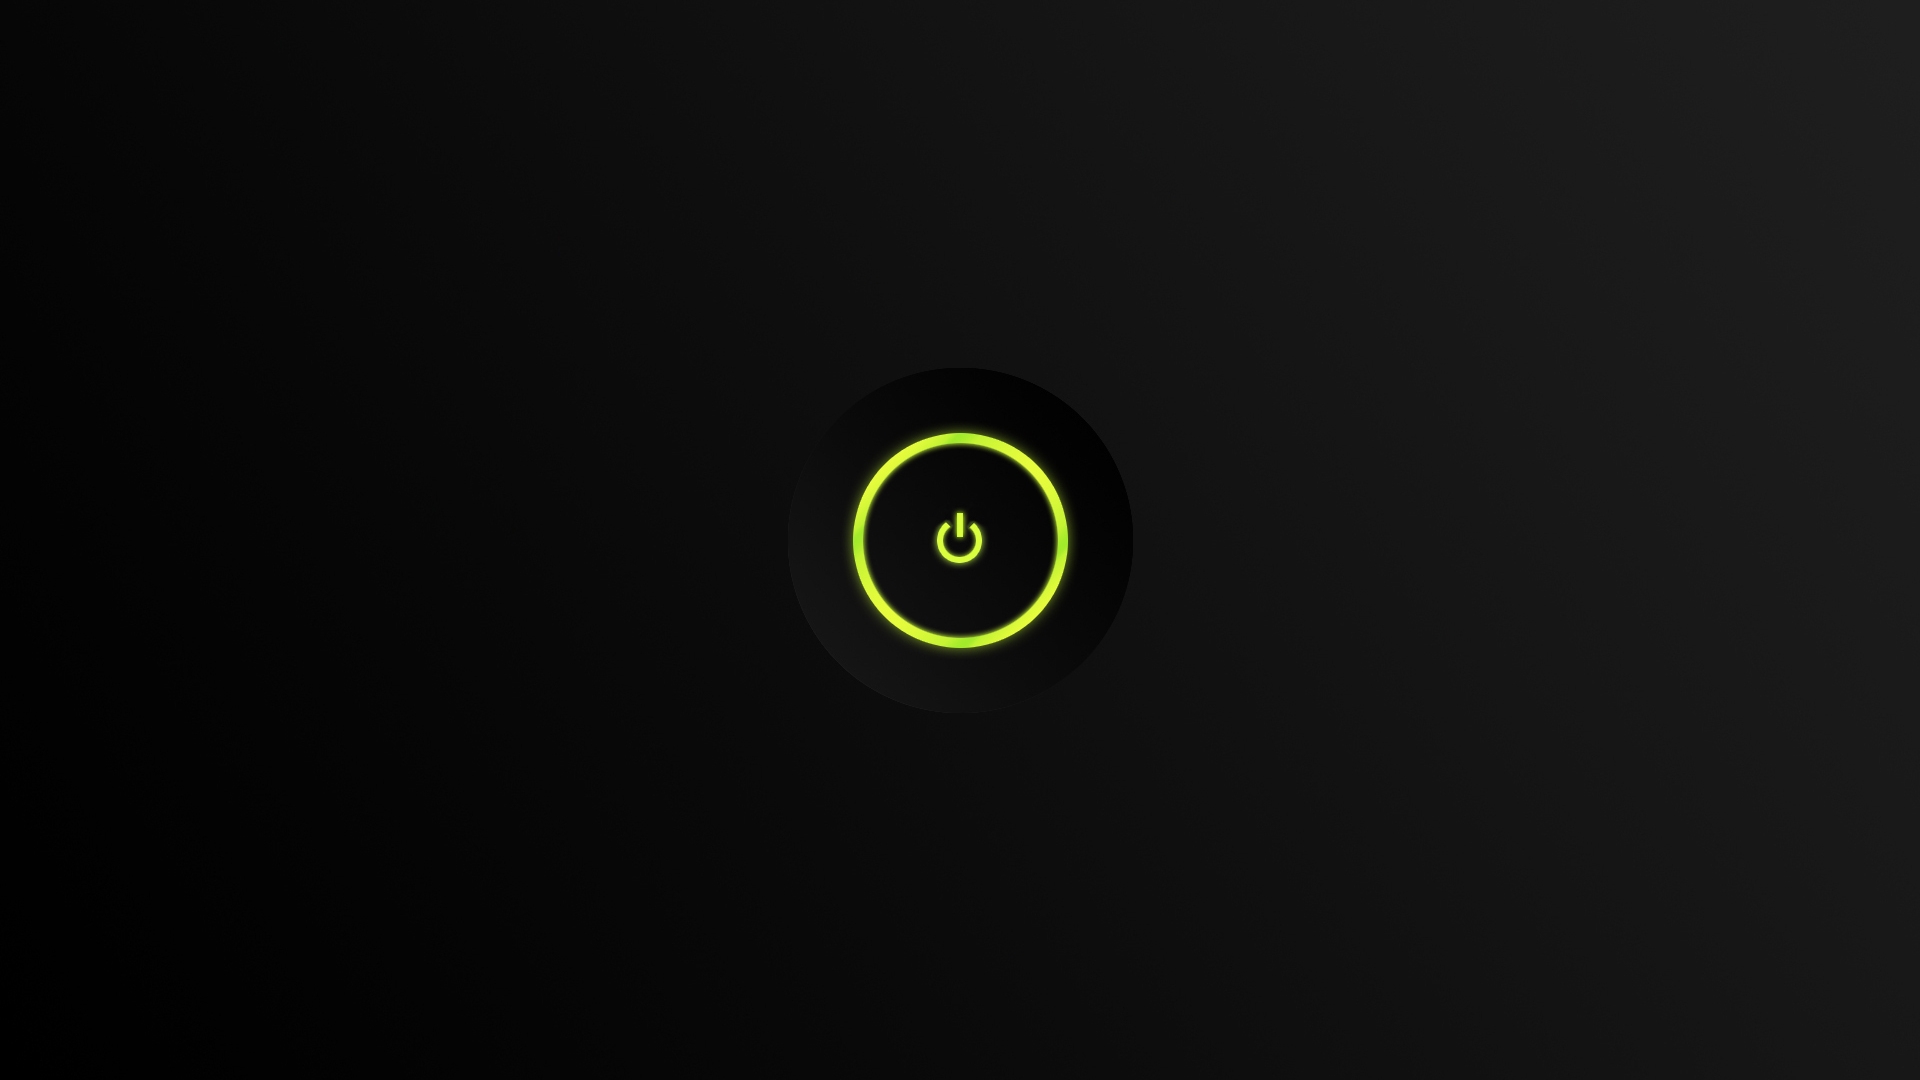 Xbox 360 Button for 1920 x 1080 HDTV 1080p resolution